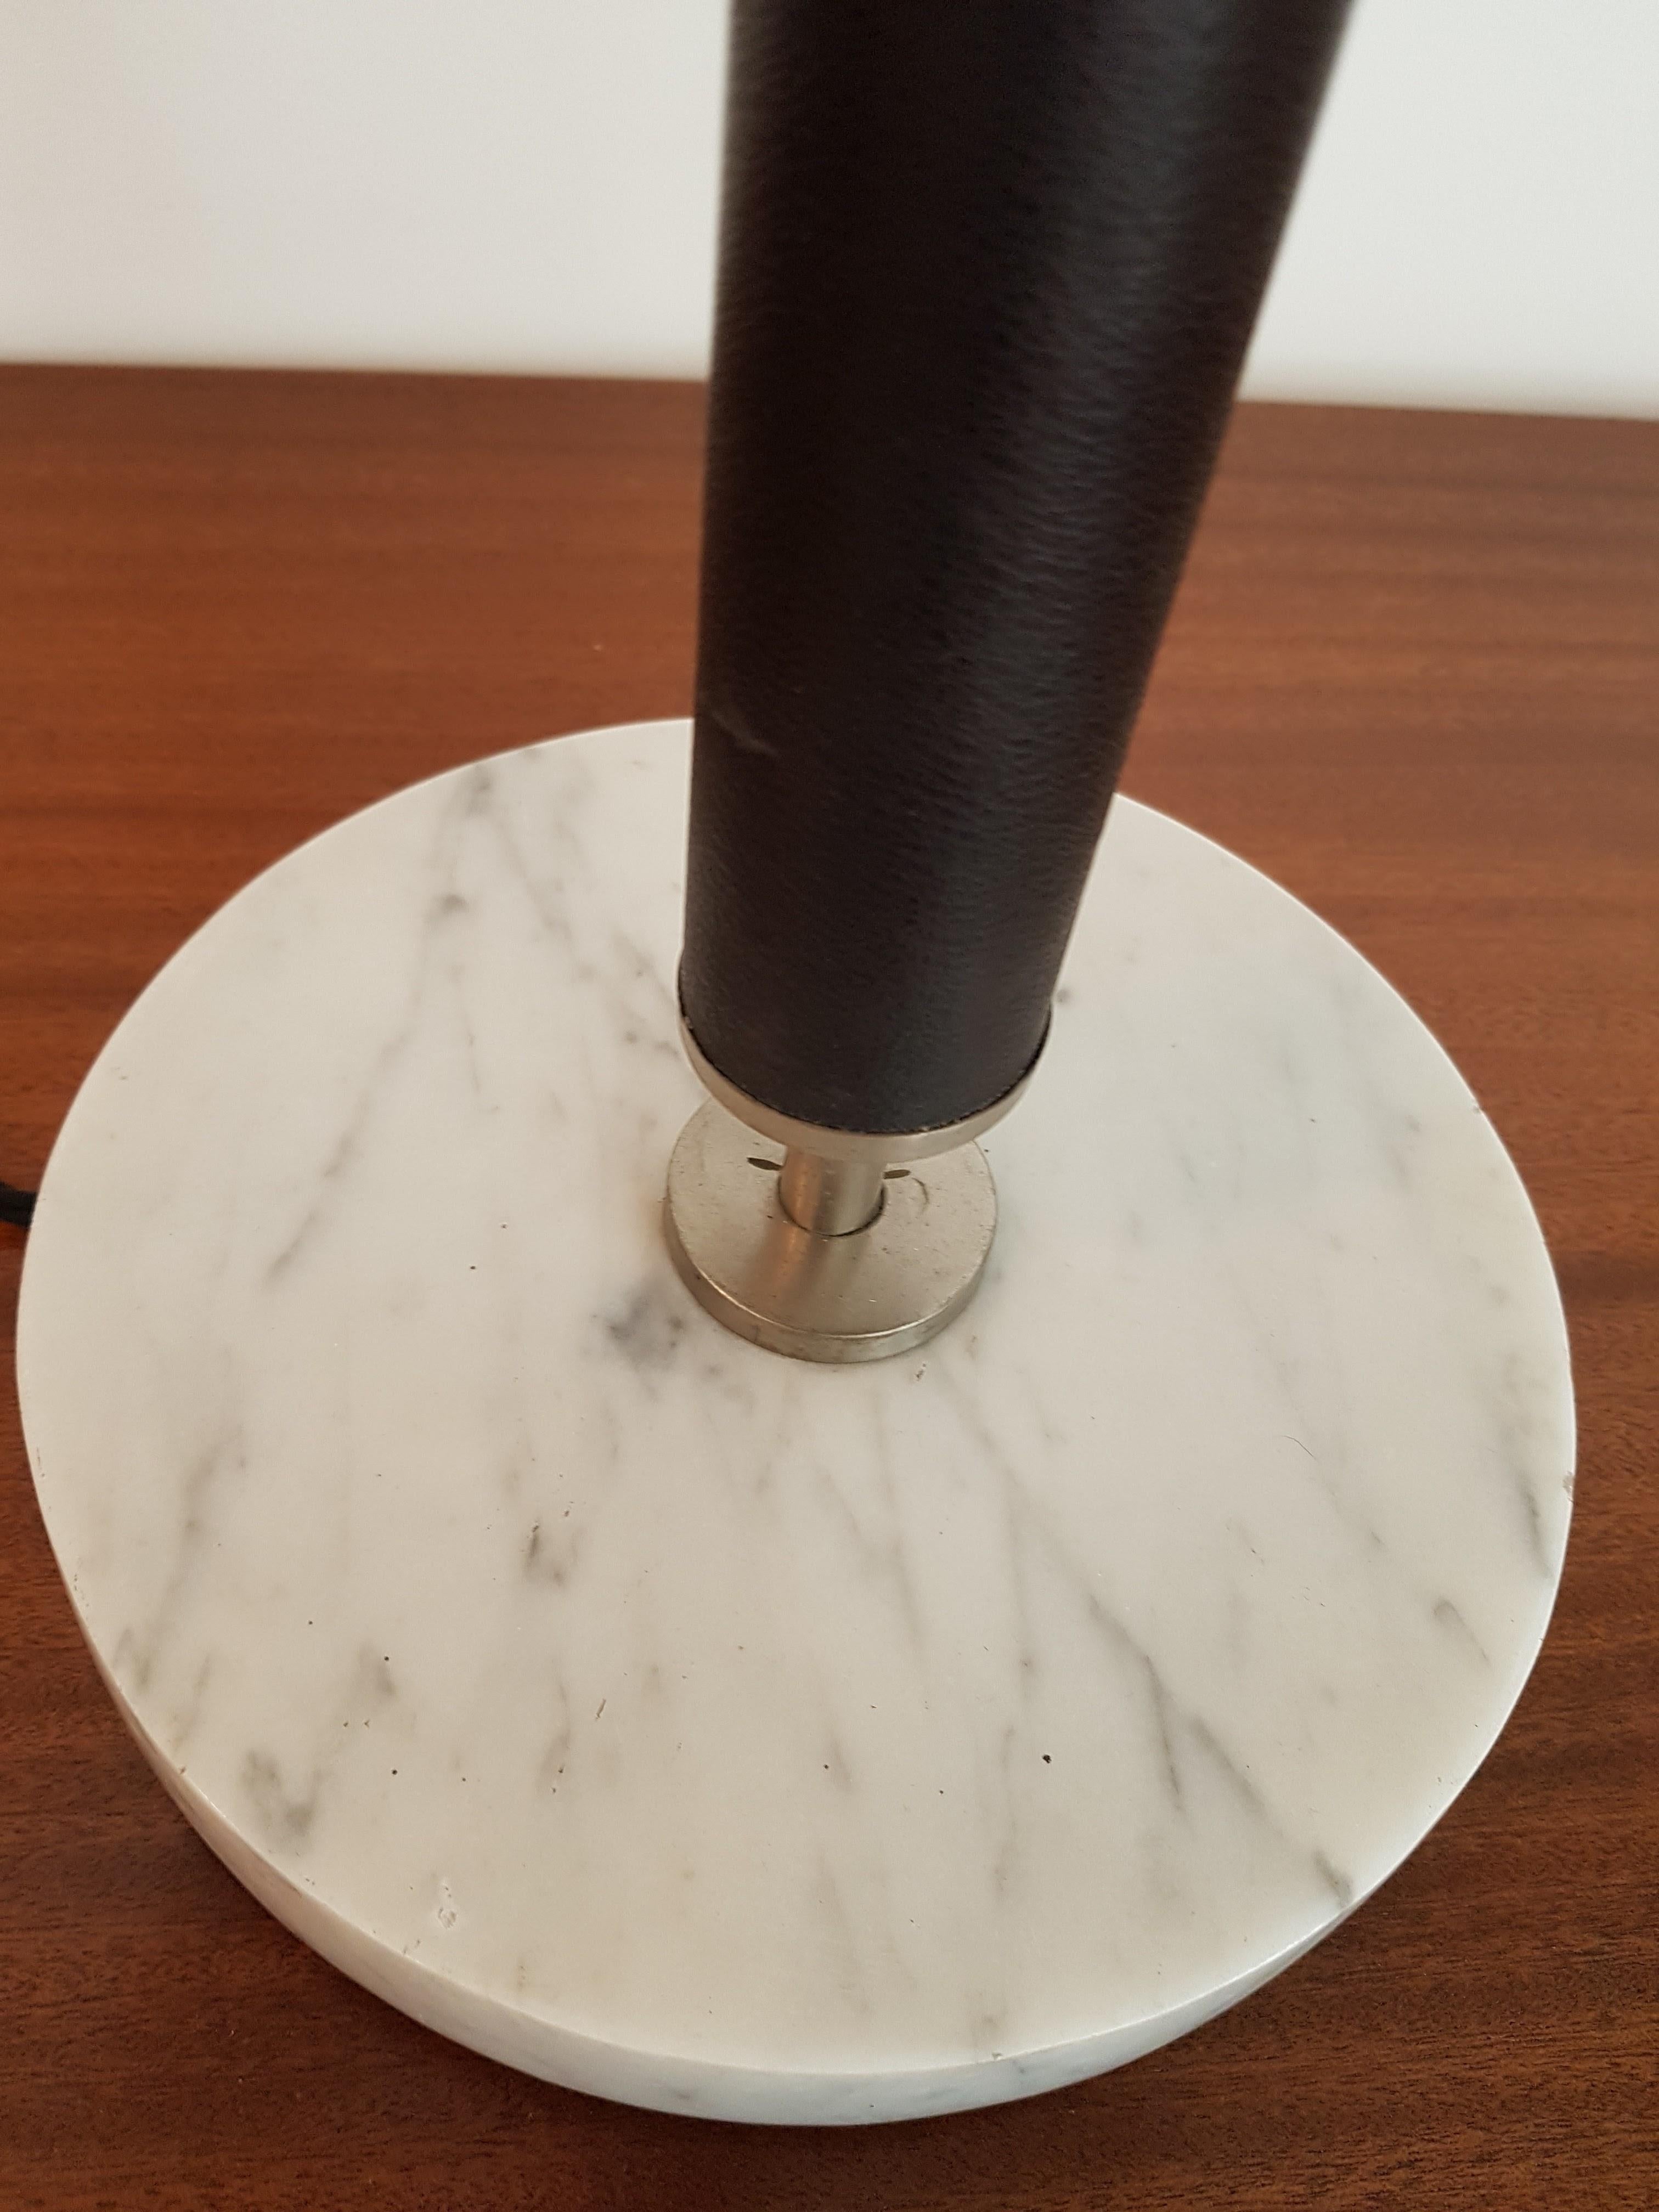 Well sized table lamp with thick Carrera marble base and leather clad stem. Comes complete with shade.